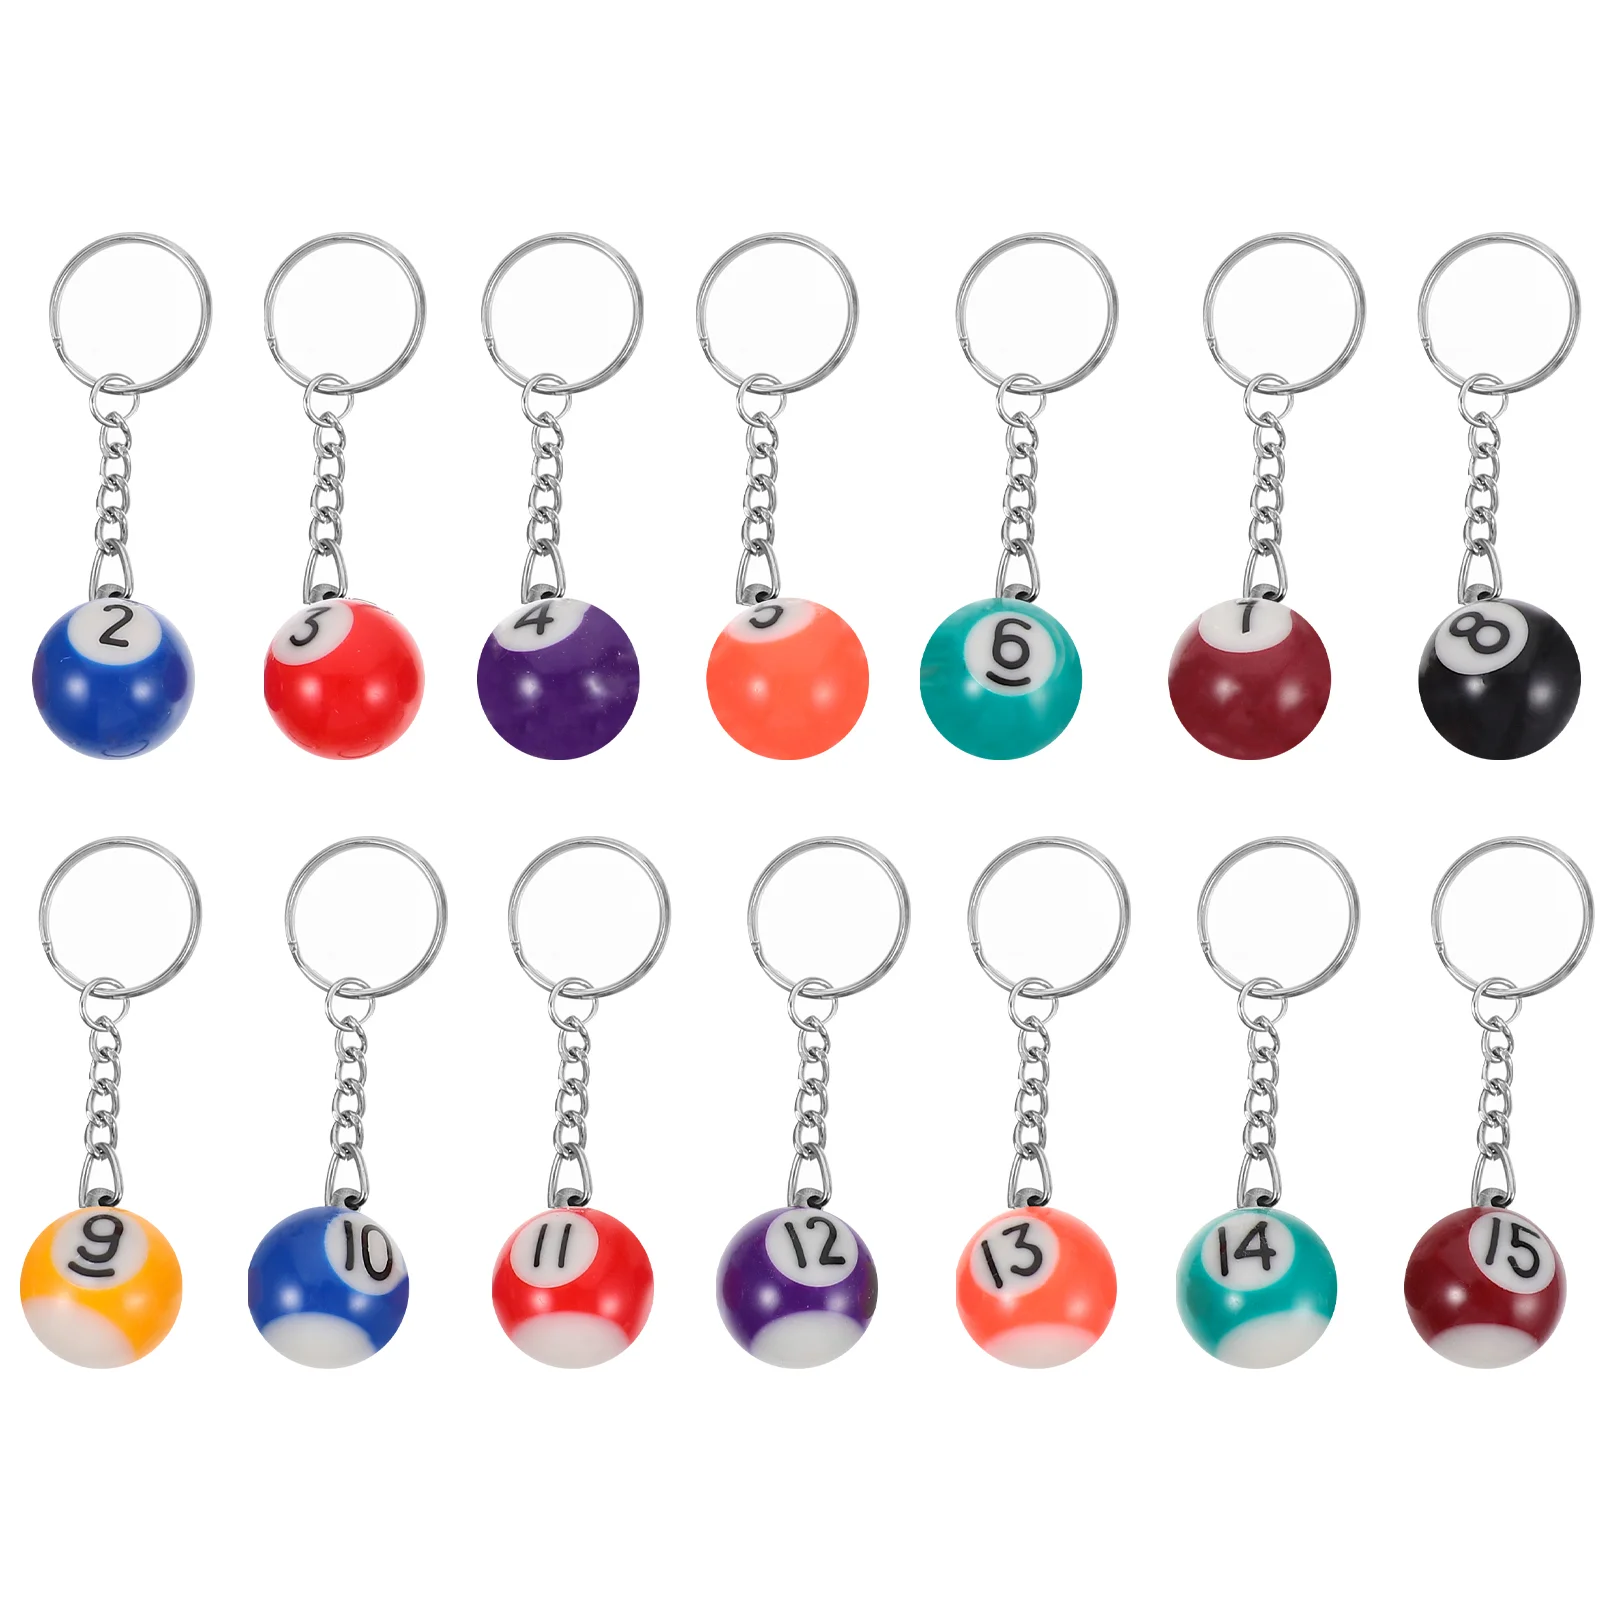 

16 Pcs Billiards Keychain Metal Decor Ball Small Keychains Decorative Sports Rings Amulet Novelty Alloy Man Decors Delicate